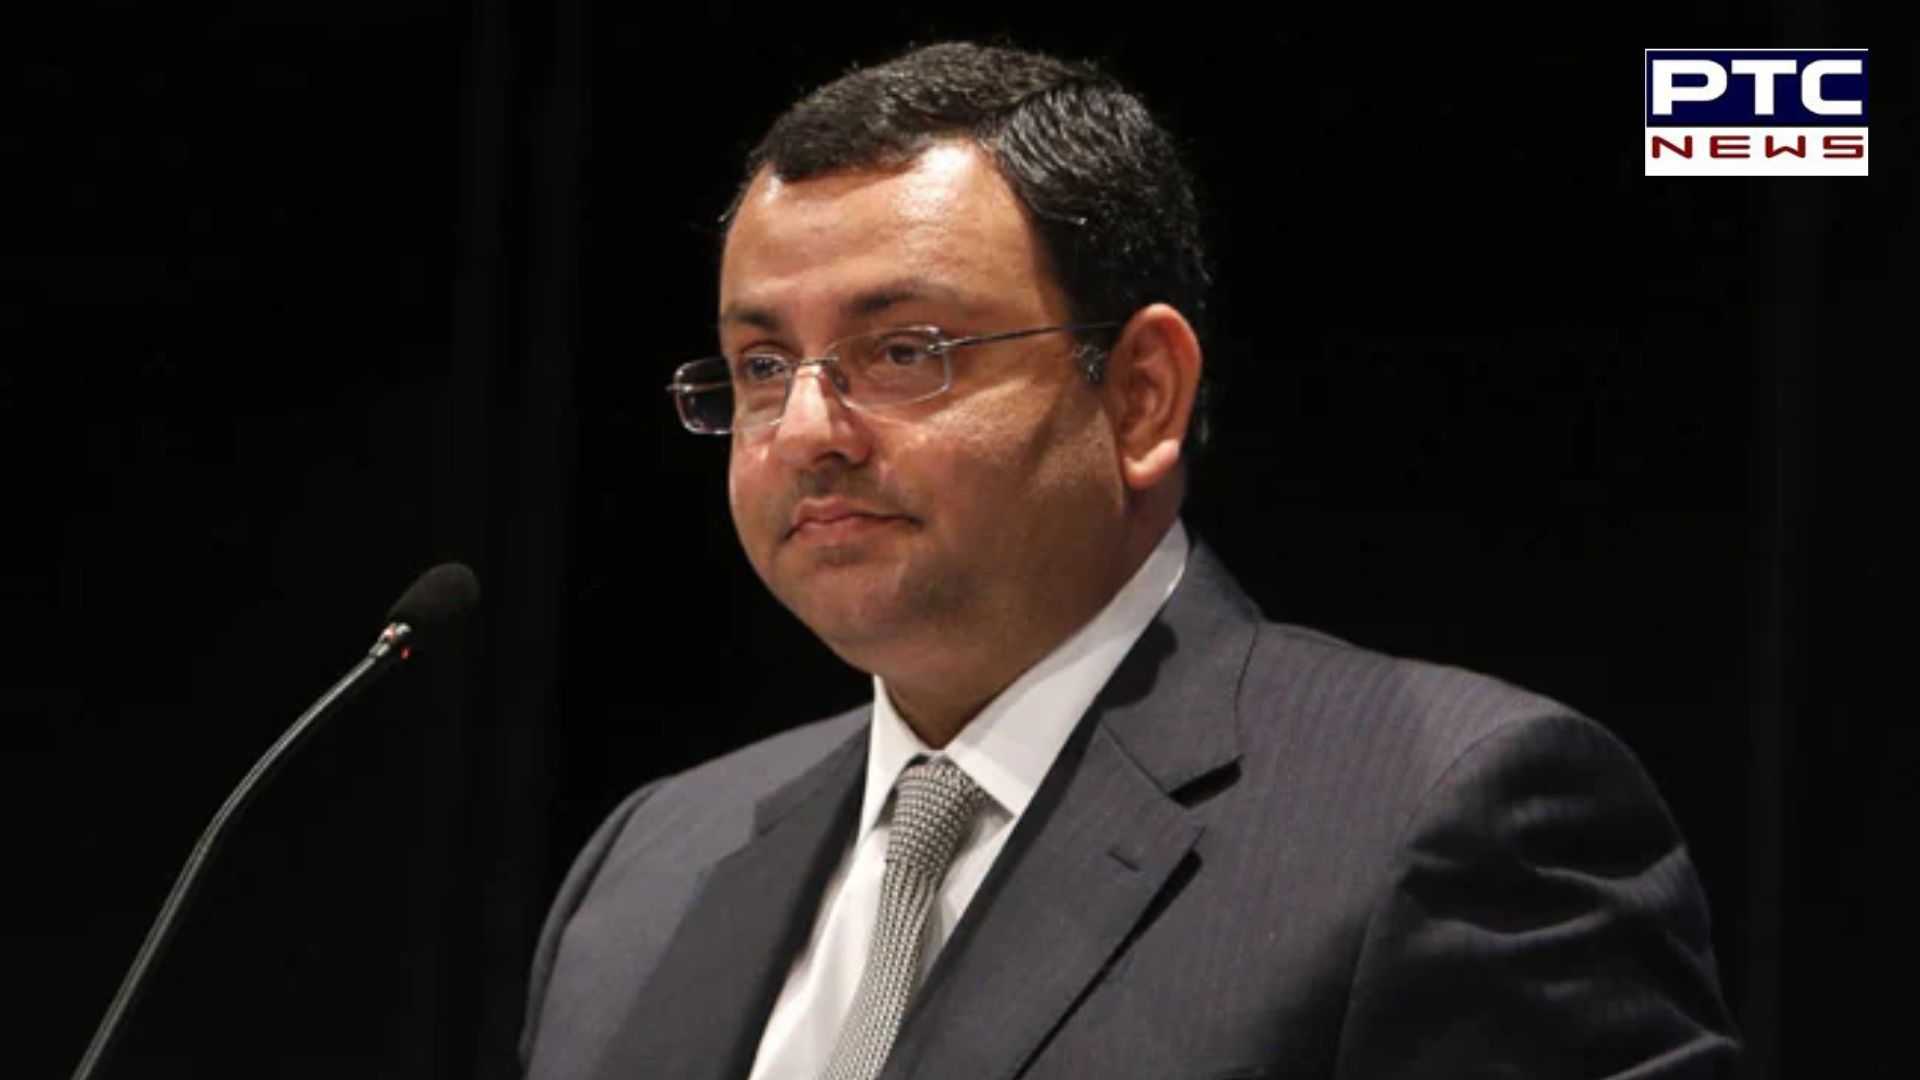 Cyrus Mistry's sons are India's wealthiest billionaire heirs under 30